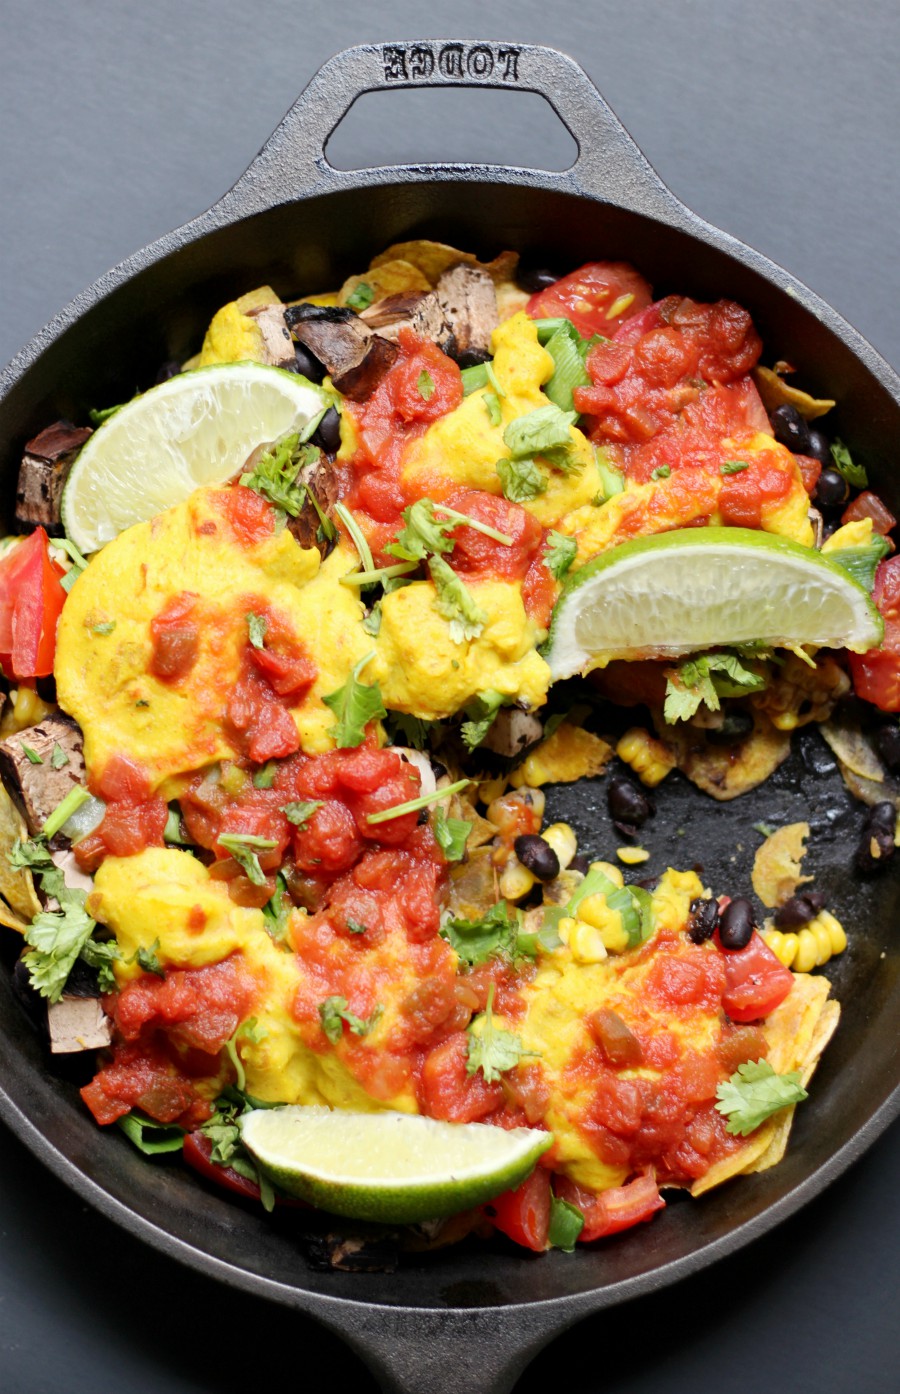 Gluten-Free Skillet Plantain Nachos (Vegan, Grain-Free, Allergy-Free) | Strength and Sunshine @RebeccaGF666 A delicious, messy, plant-based skillet of nachos! Gluten-Free Skillet Plantain Nachos that are vegan, grain-free, and top 8 allergy-free! Loaded with veggies and plantain chips, topped with salsa and an easy homemade vegan cheese sauce recipe, these nachos make for a fun Mexican meal any night of the week! #nachos #glutenfree #vegan #plantains #grainfree #strengthandsunshine